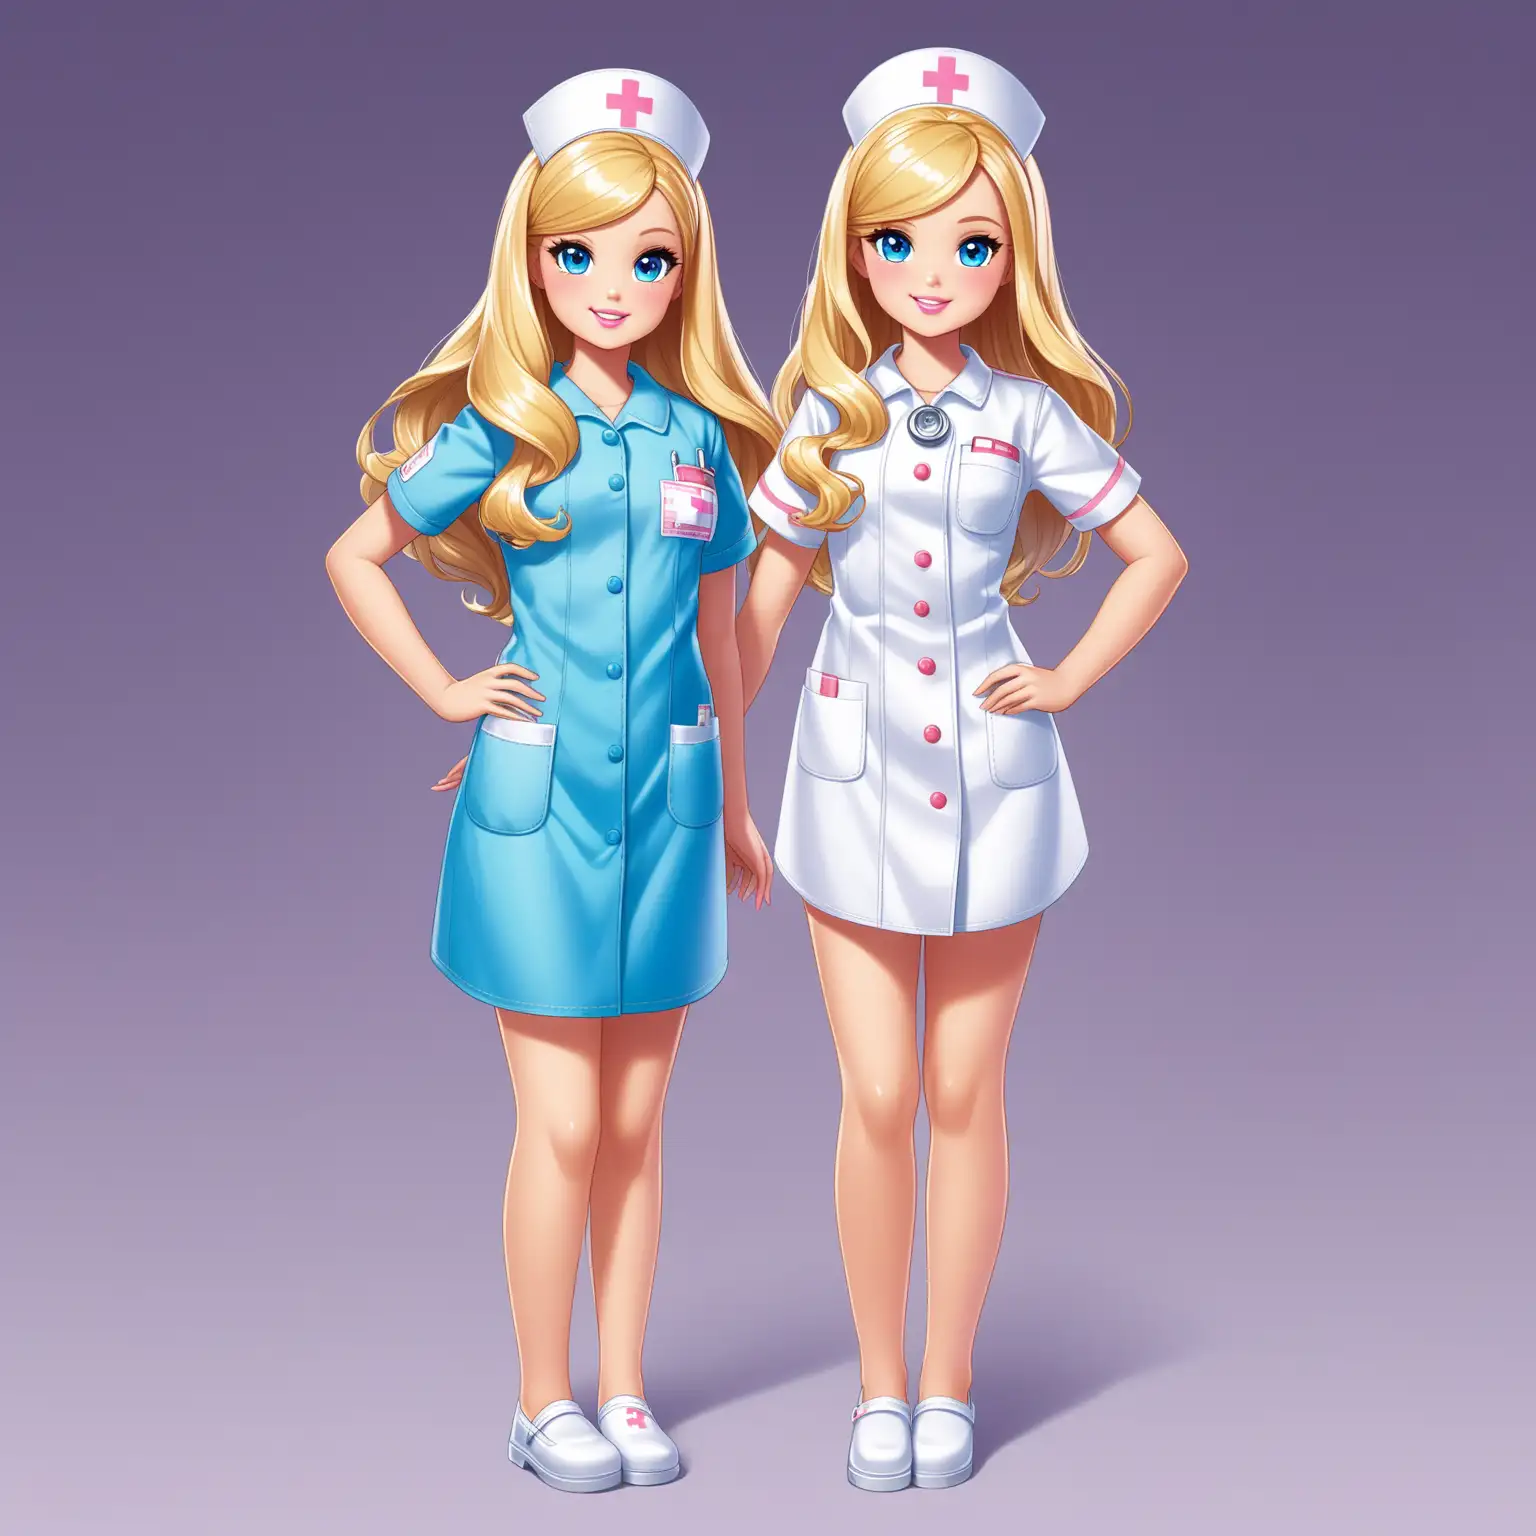 Chelsea from Barbie in Nurse Uniform Young Girl with Blue Eyes and Blonde Wavy Hair